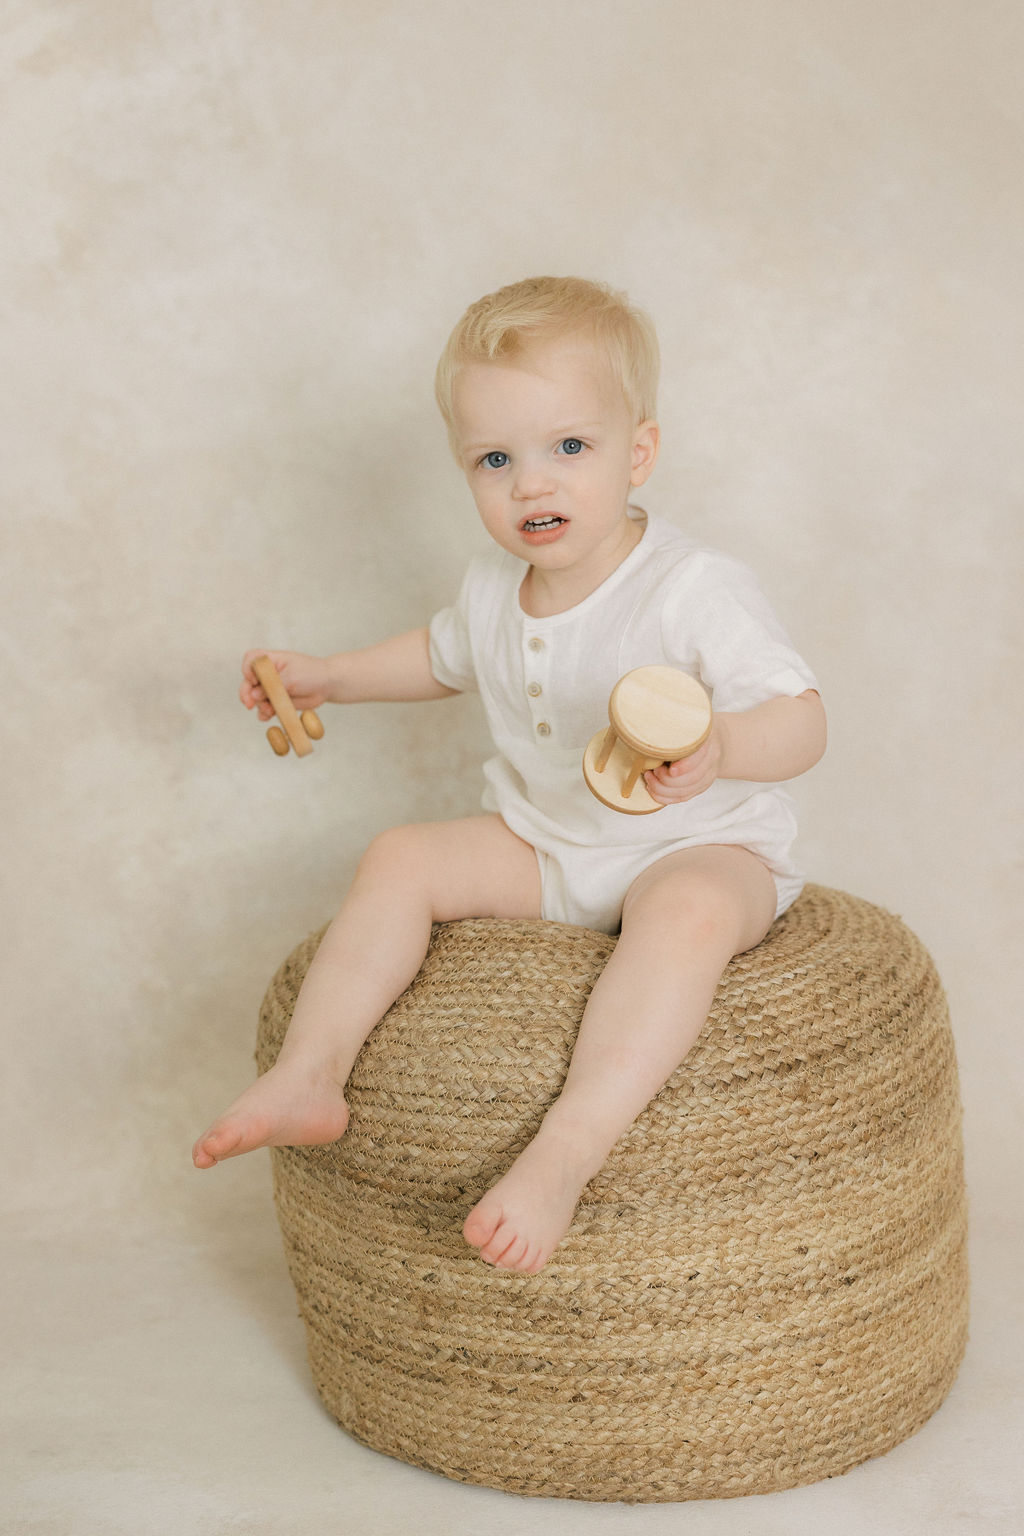 A toddler boy plays with wooden toys while sitting on a woven stool in a studio after meeting happy family after